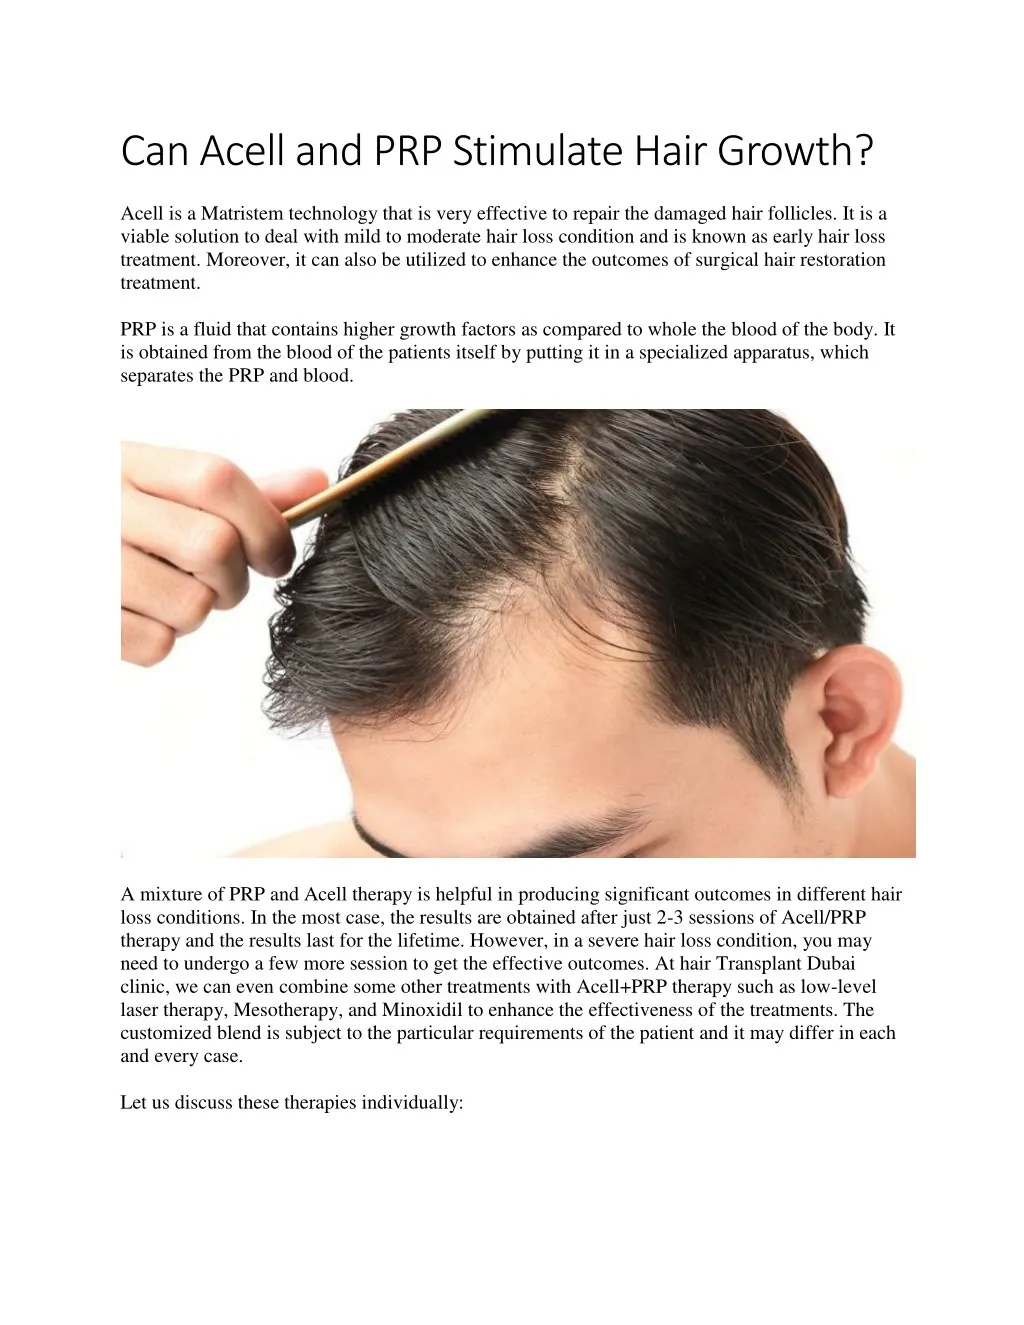 can acell and prp stimulate hair growth